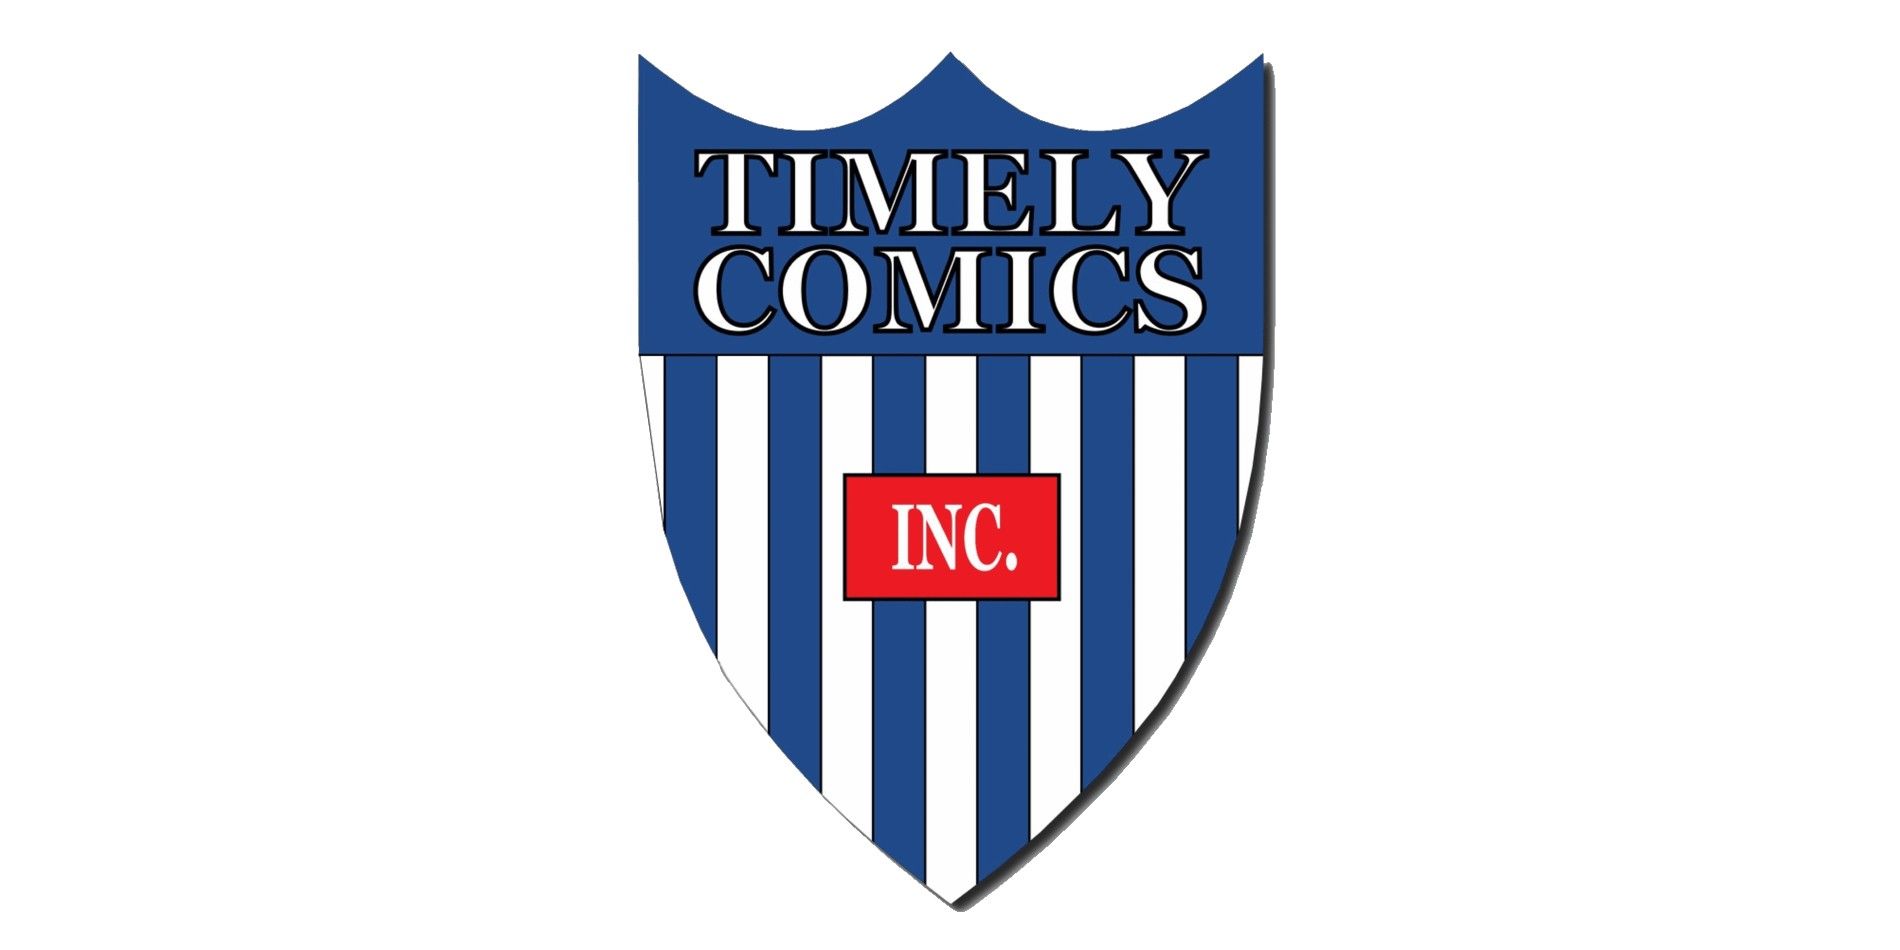 Timely Comics logo on a white background